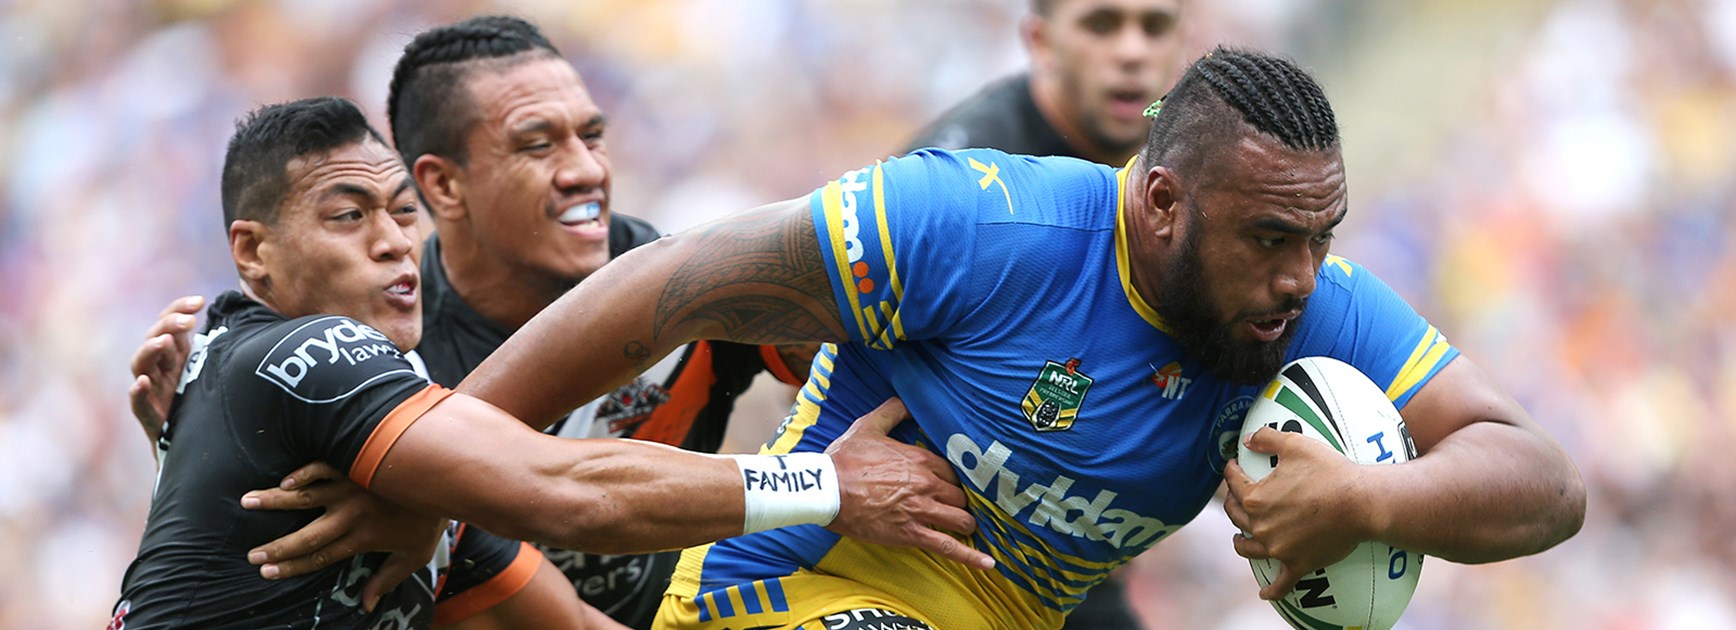 Eels prop Junior Paulo in action against Wests Tigers in Round 4 of the NRL Telstra Premiership.